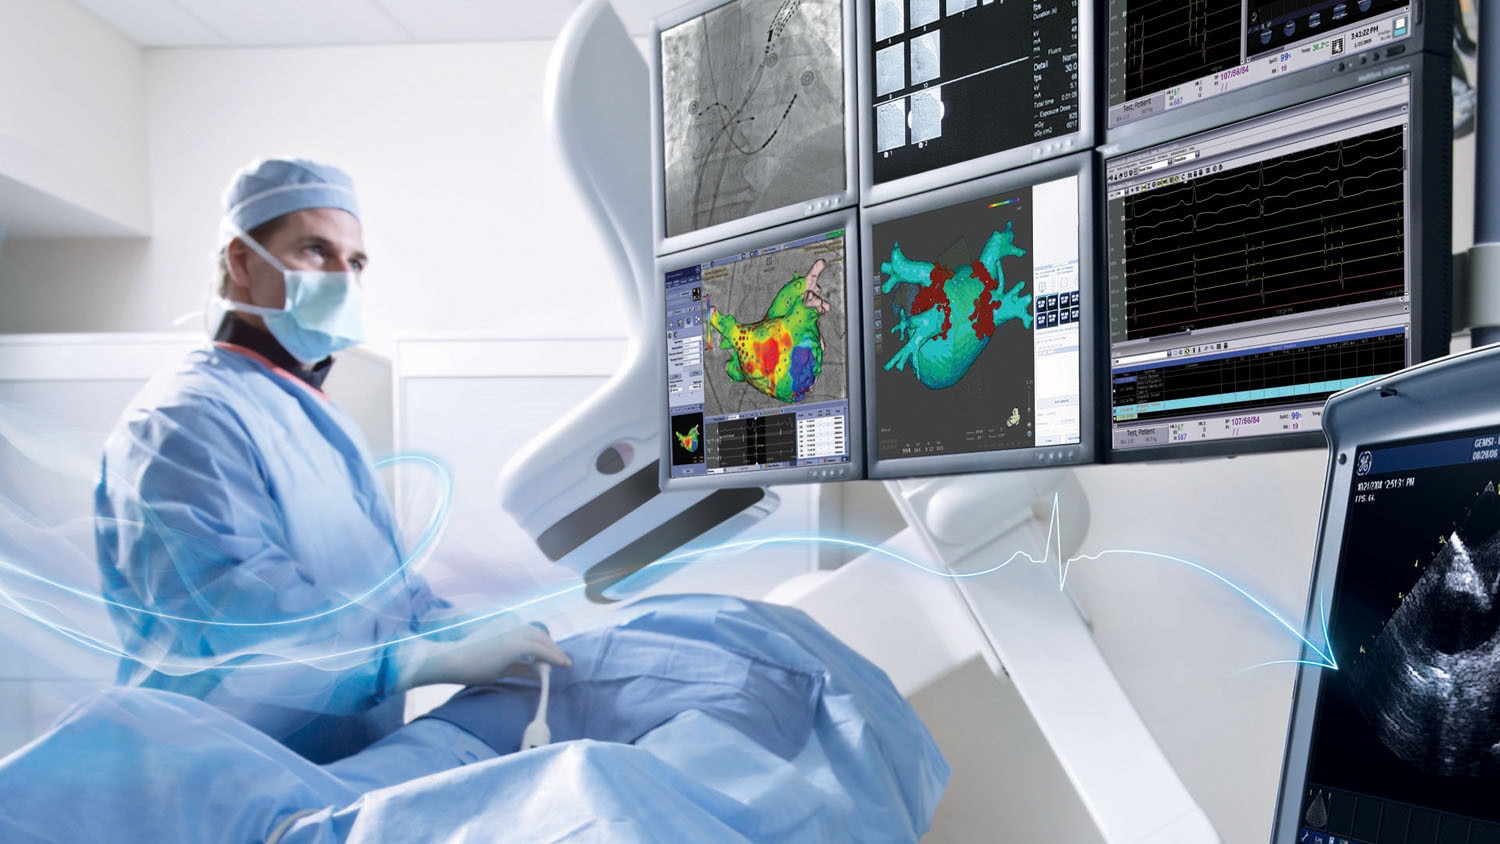 education-product-education-clinical-interventional-systems-igs_innova-ep-vision-2-0_jpg